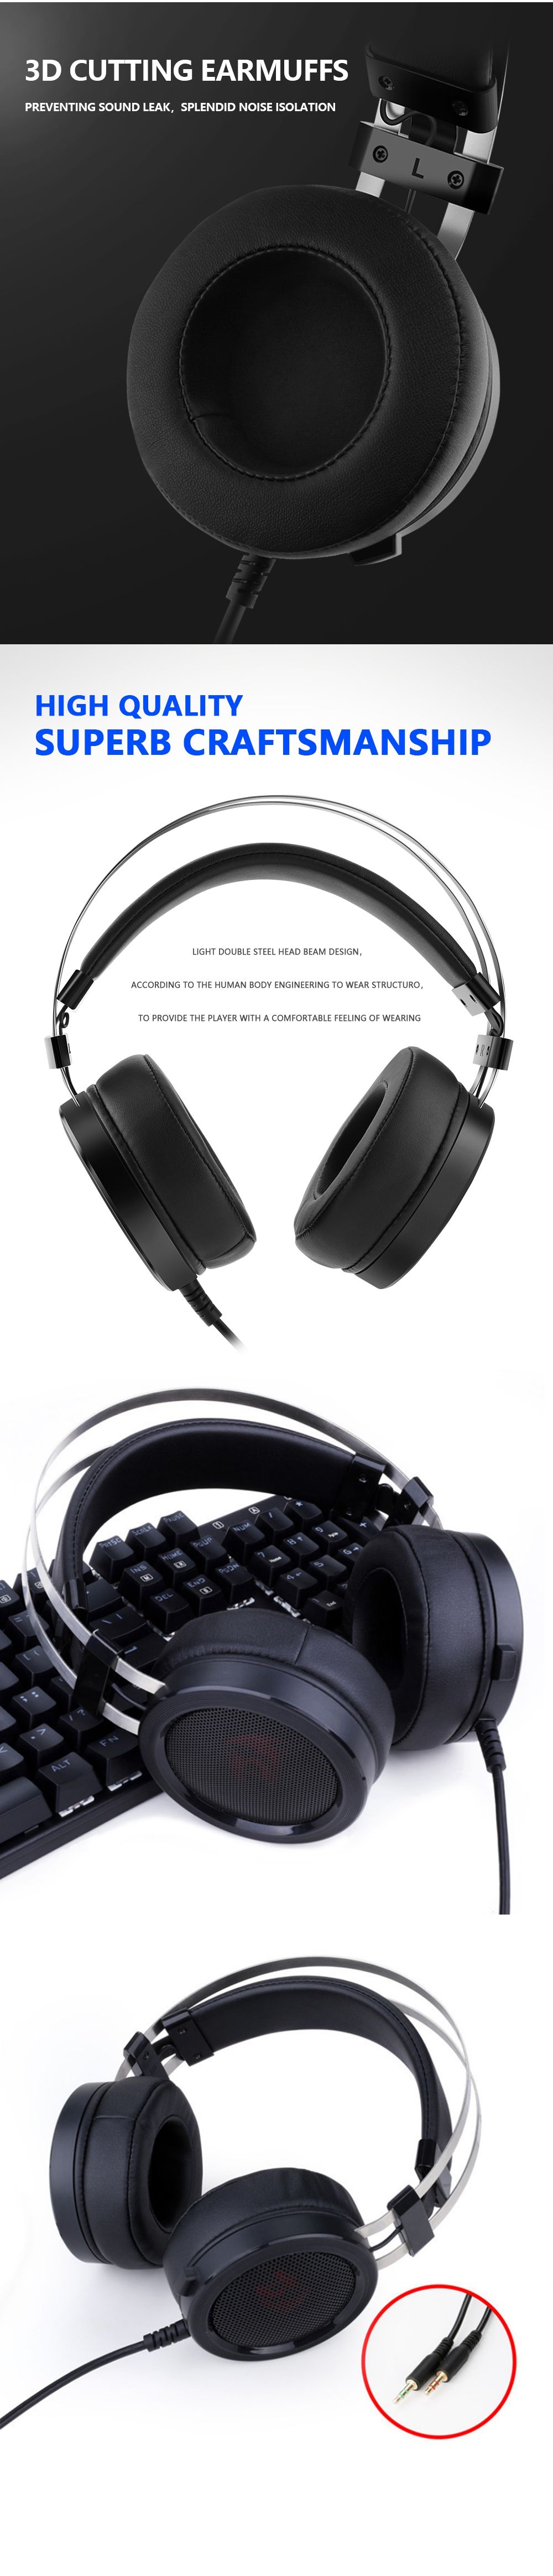 Redragon-H901-3D-Stereo-Surround-Sound-35mm--USB-Wired-Gaming-Headphone-Black-Adjusting-Headset-for--1572698